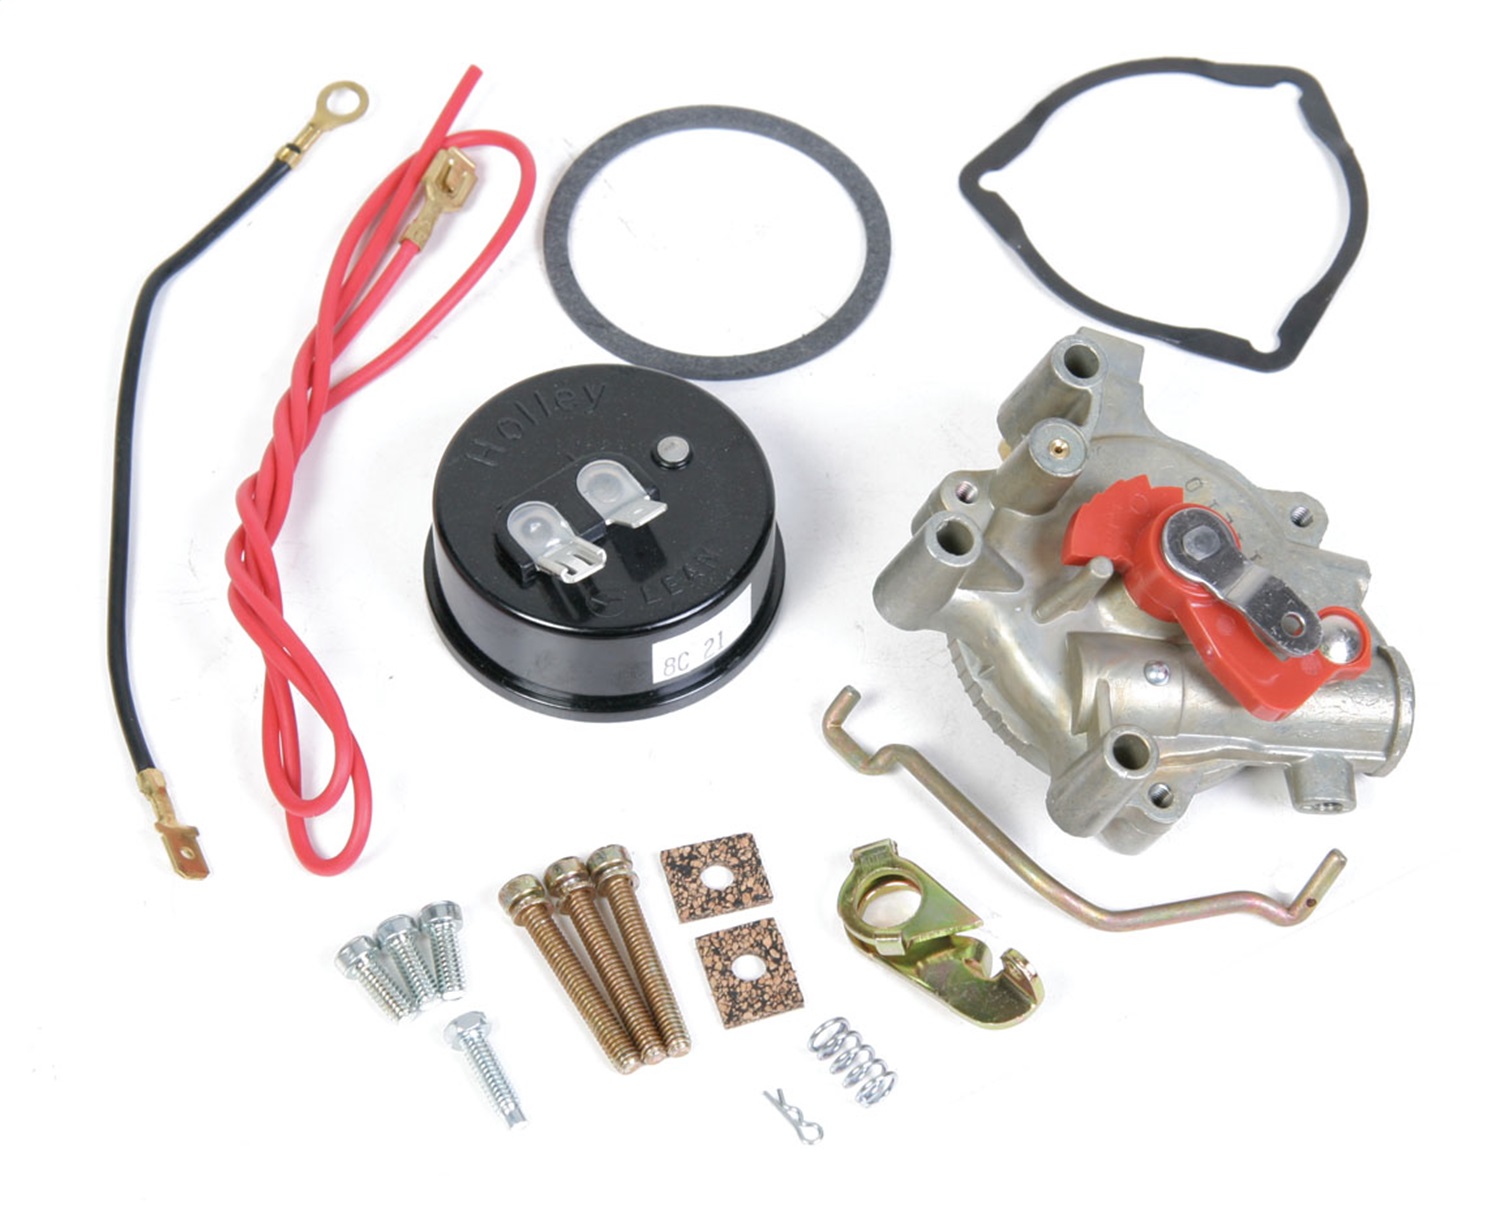 Holley Performance Holley Performance 45-223 Choke Conversion Kit